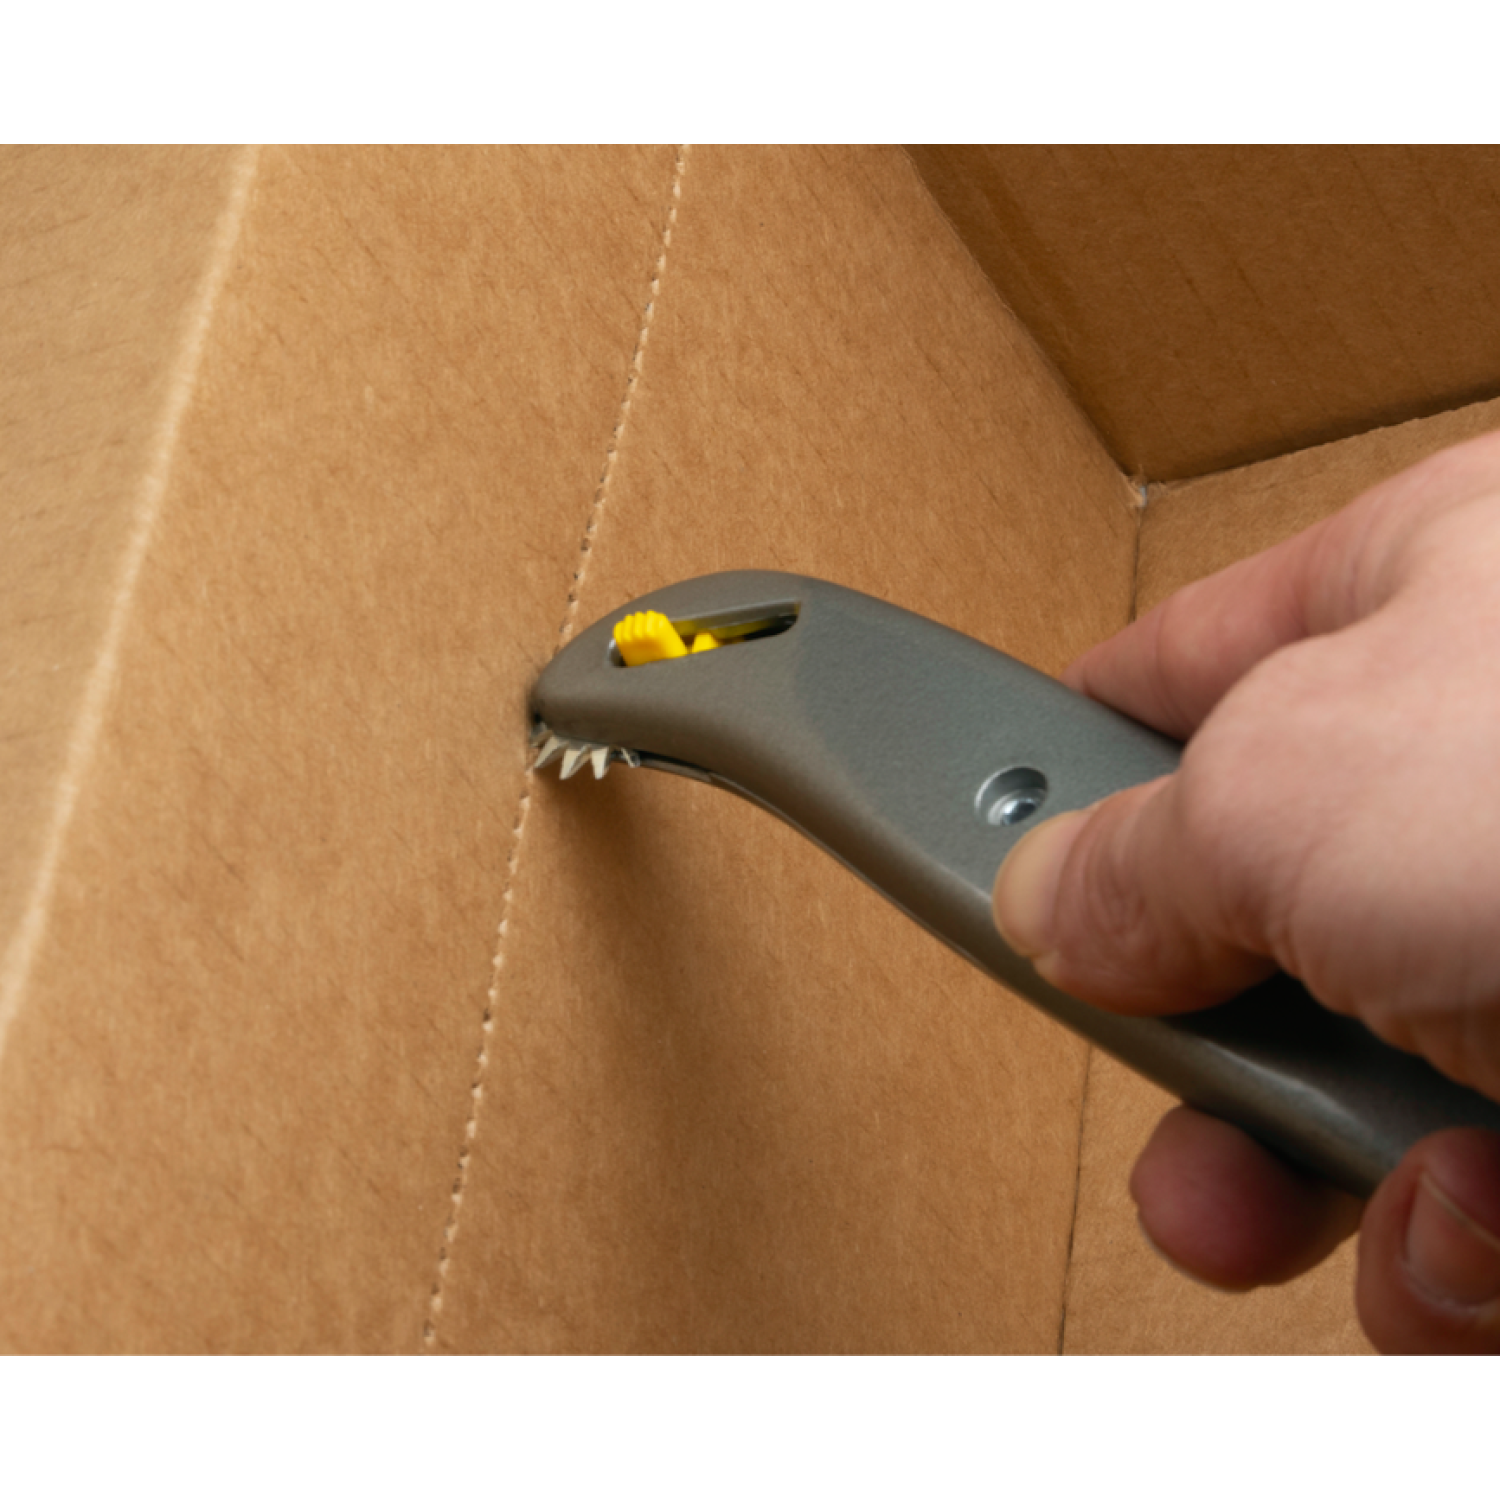 IDL-190 HD Retractable Box Cutter with Scoring Wheel buy in stock in U.S.  in IDL Packaging